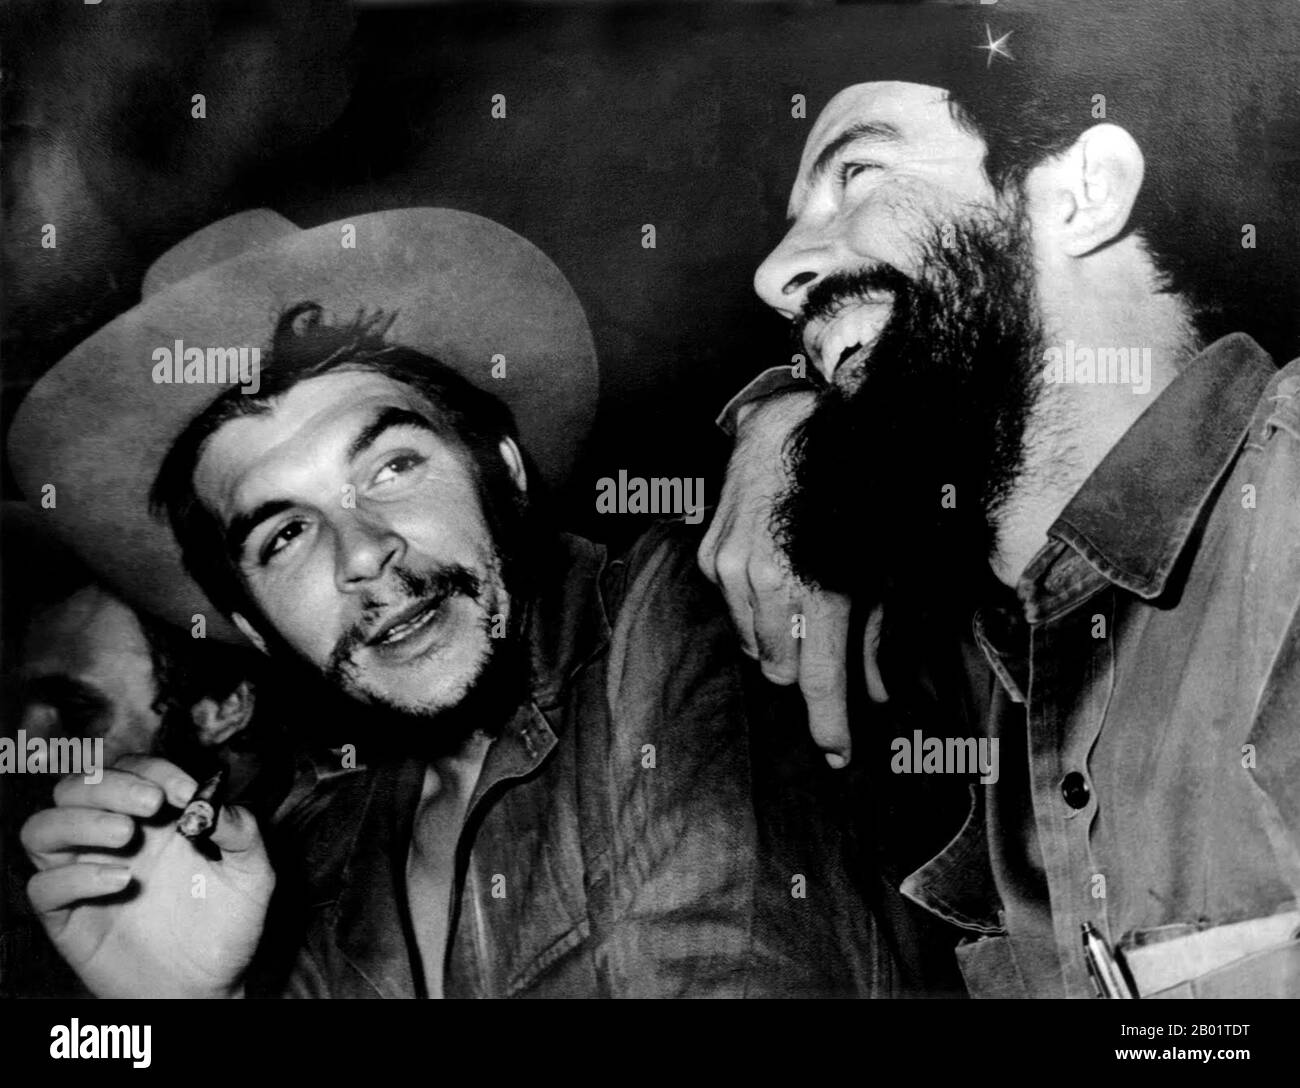 Cuba: Che Guevara (centre) talks with Camilo Cienfuegos (right), Fidel Castro just visible to left, c. 1959.  The Cuban Revolution was a successful armed revolt by Fidel Castro's 26th of July Movement, which overthrew the US-backed Cuban dictator Fulgencio Batista on 1 January 1959, after over five years of struggle. Stock Photo